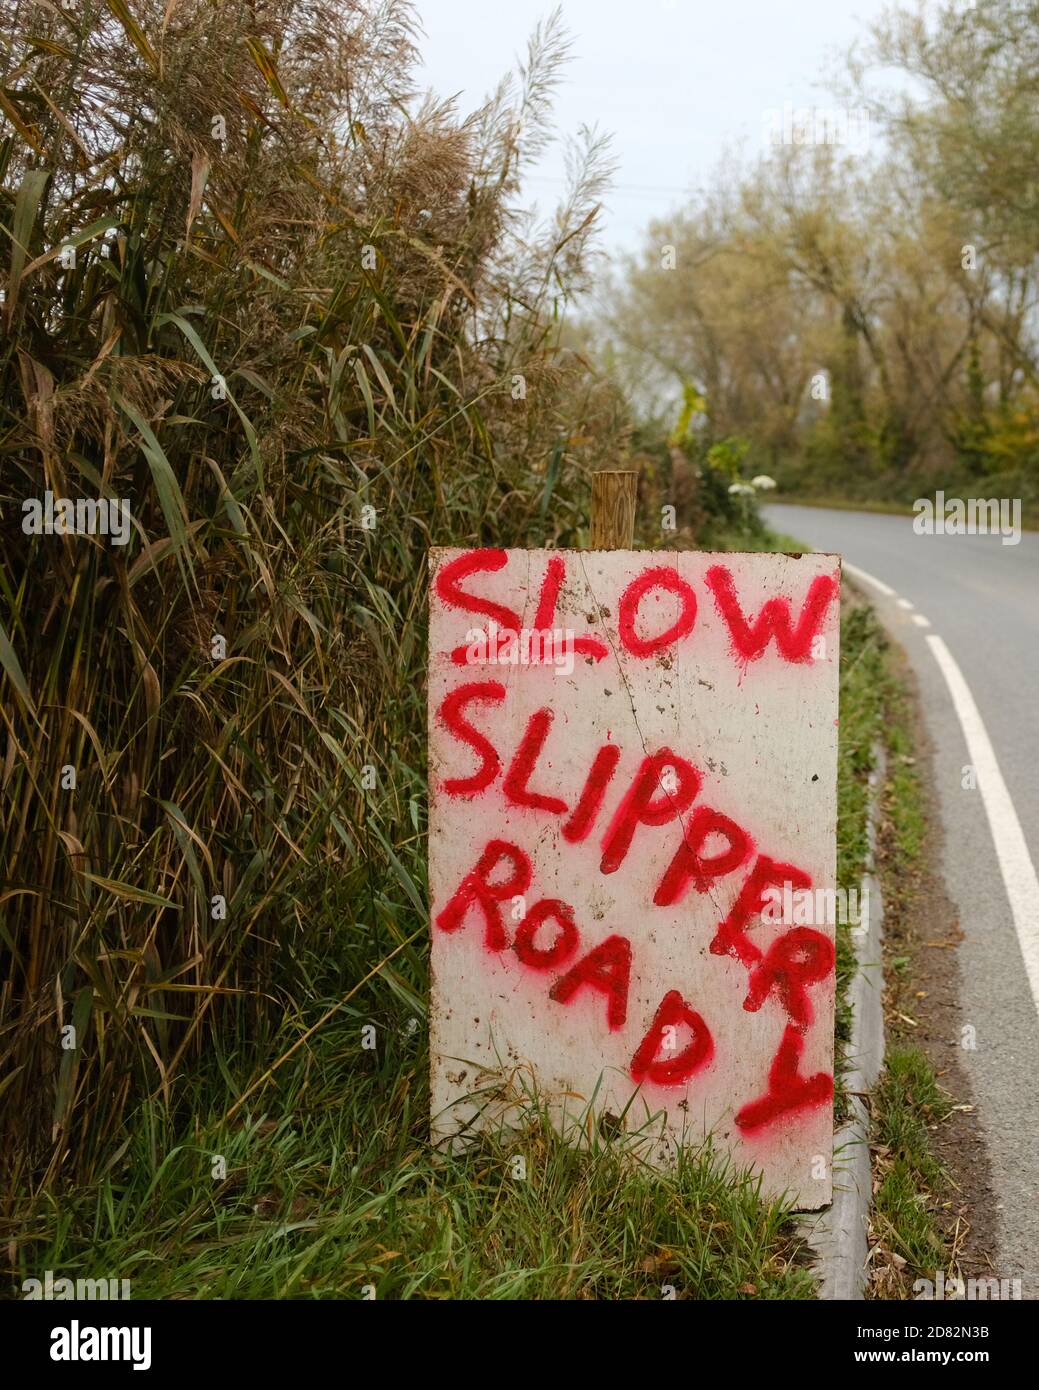 October 2020 - Slow slippery road hand painted signs on a country road in rural Somerset, England Stock Photo